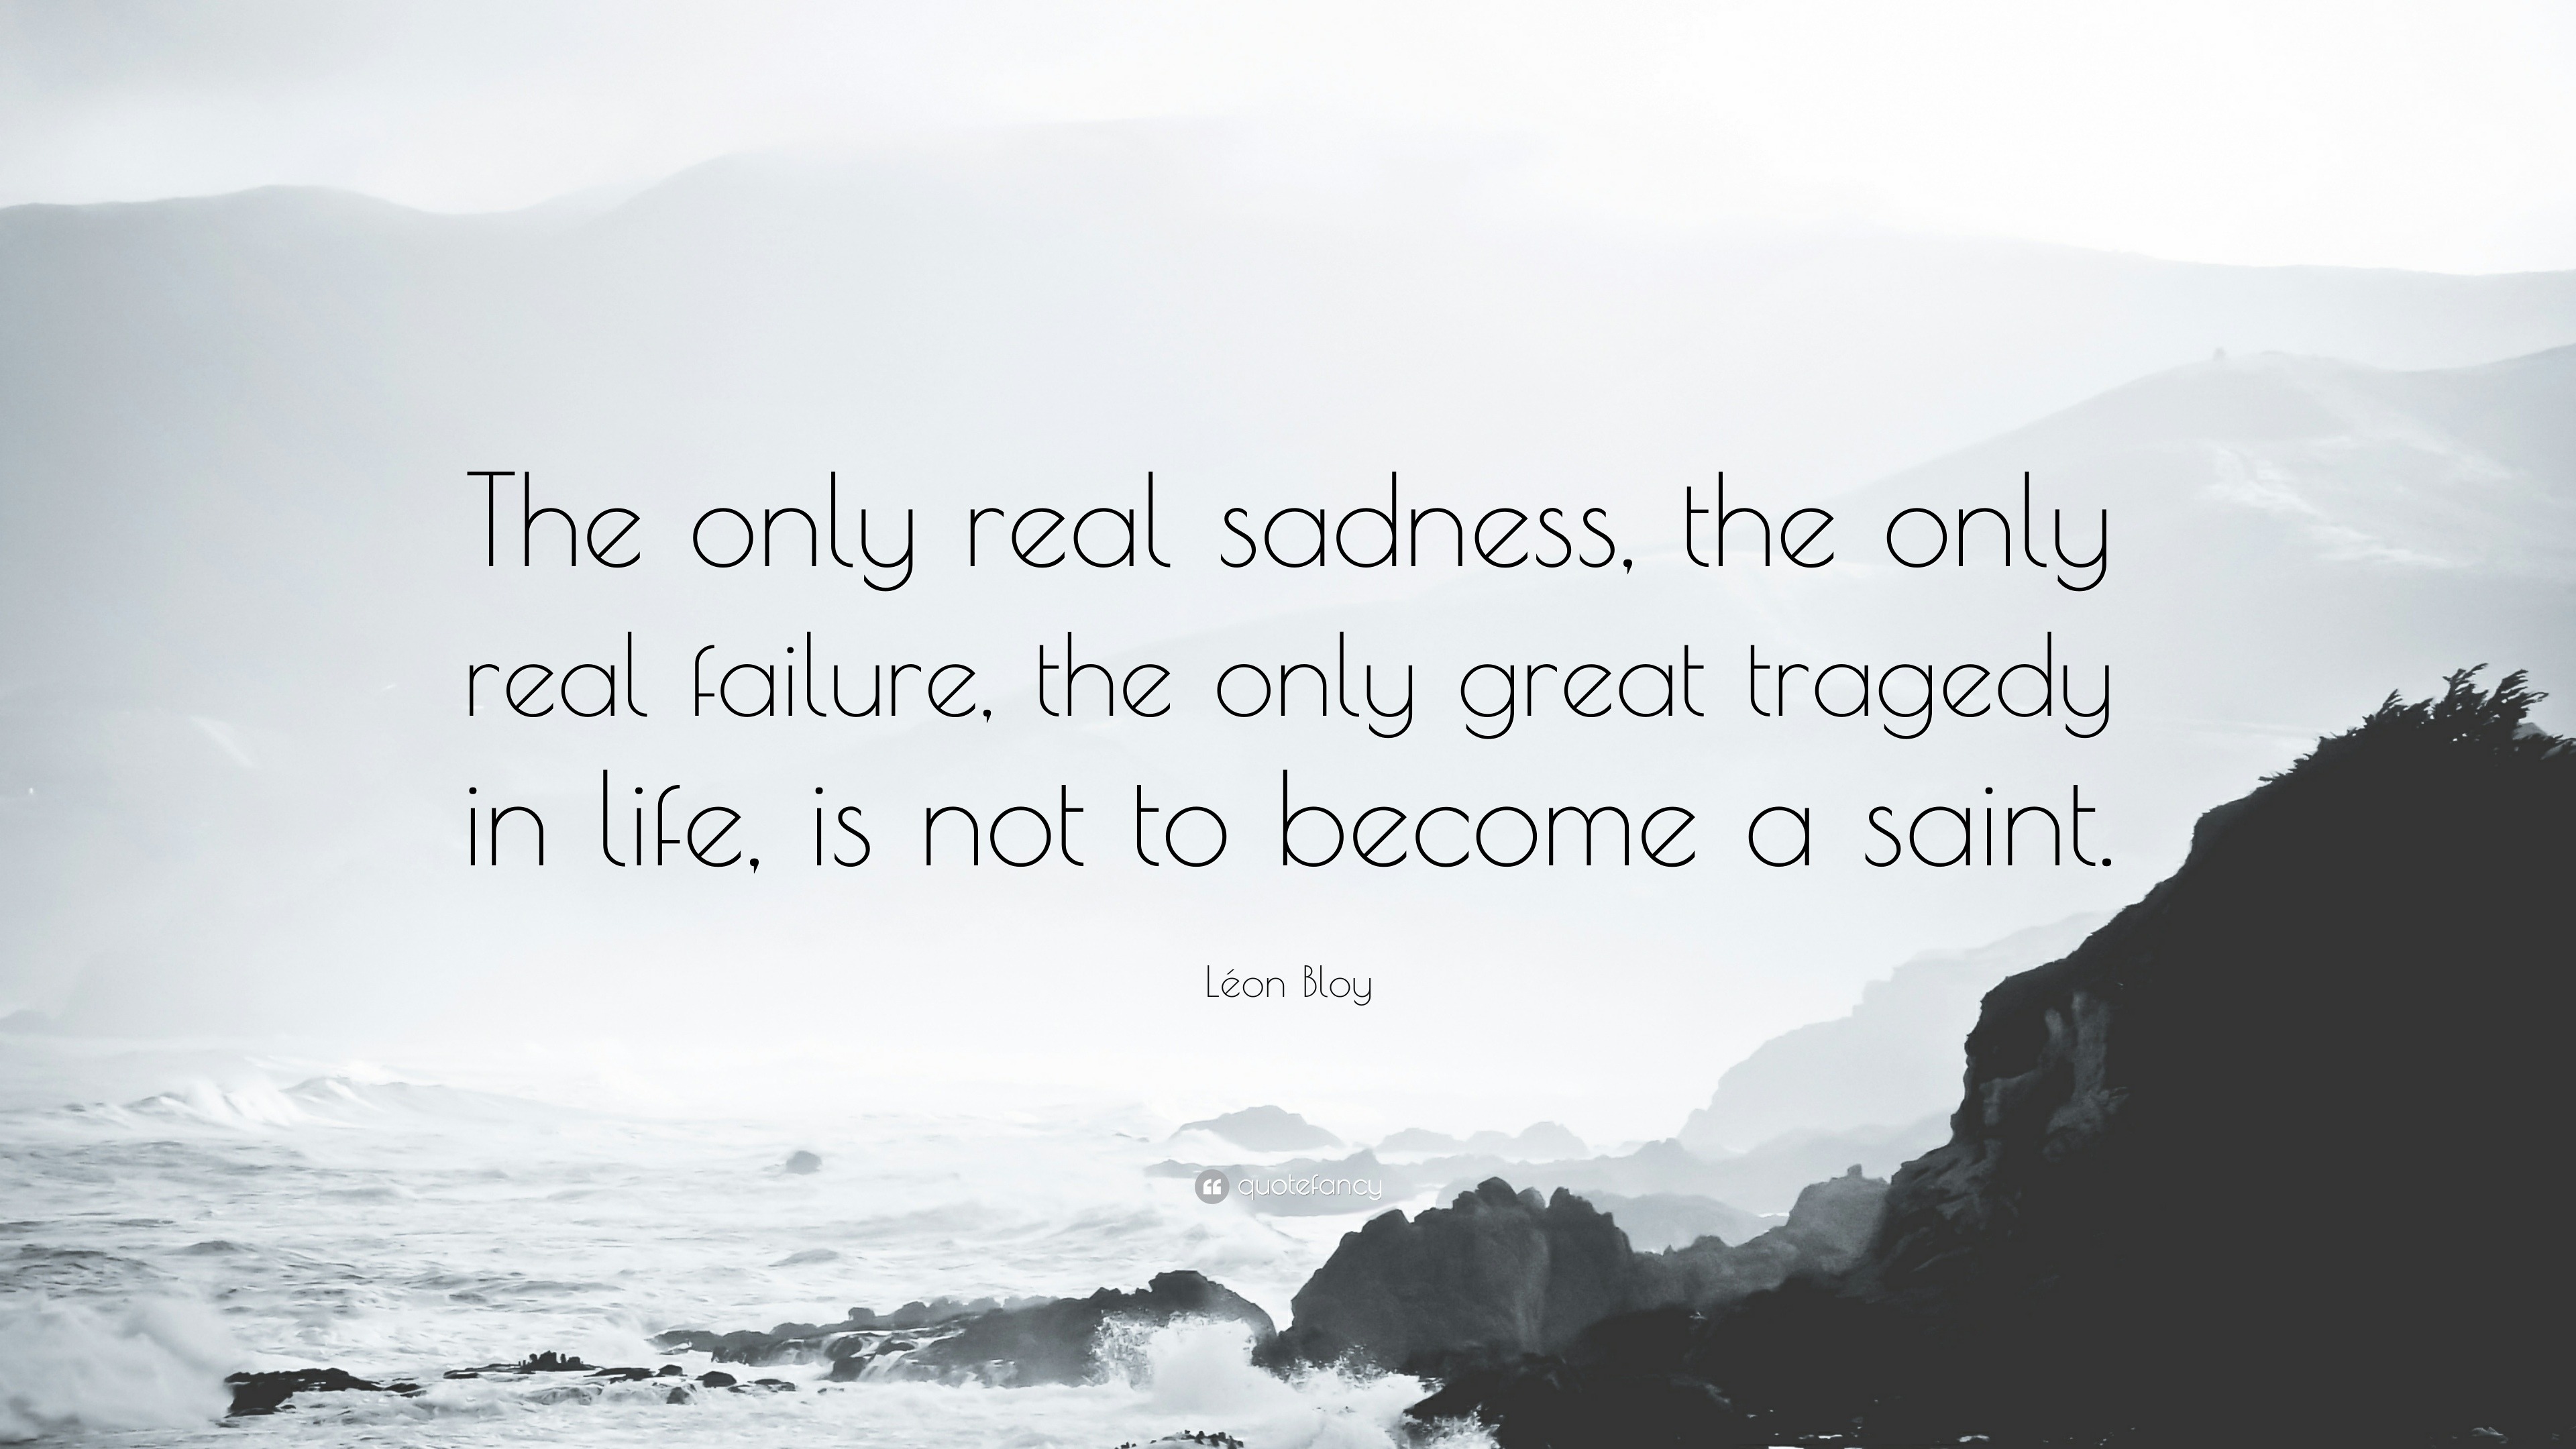 Sadness Quotes “The only real sadness the only real failure the only